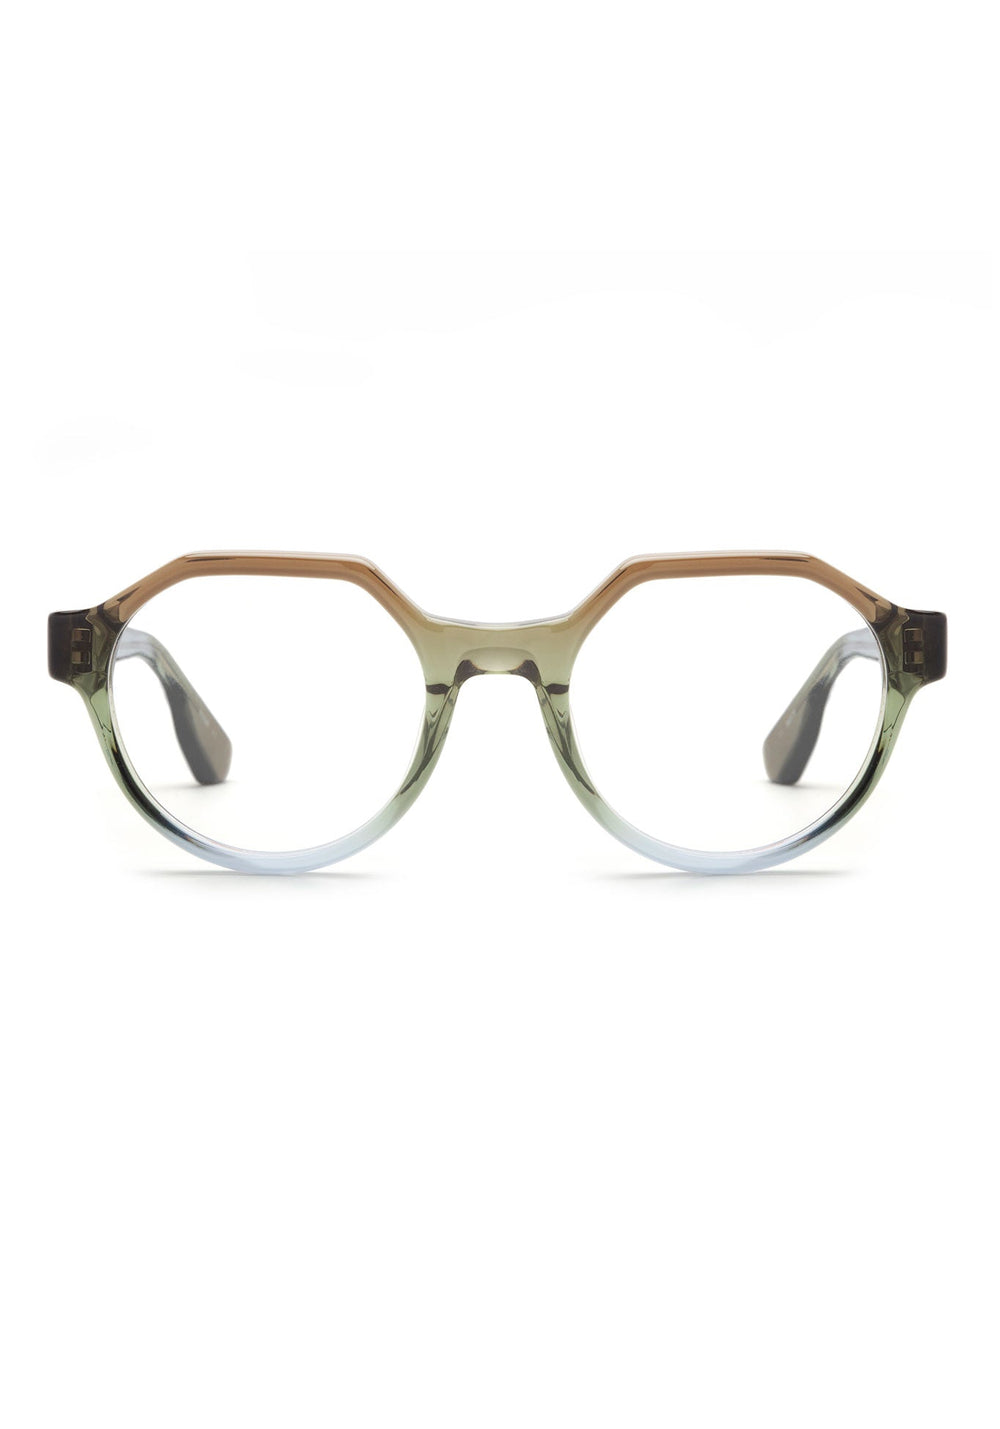 KREWE SADIE | Matcha Handcrafted, Green and Blue Acetate Luxury Glasses